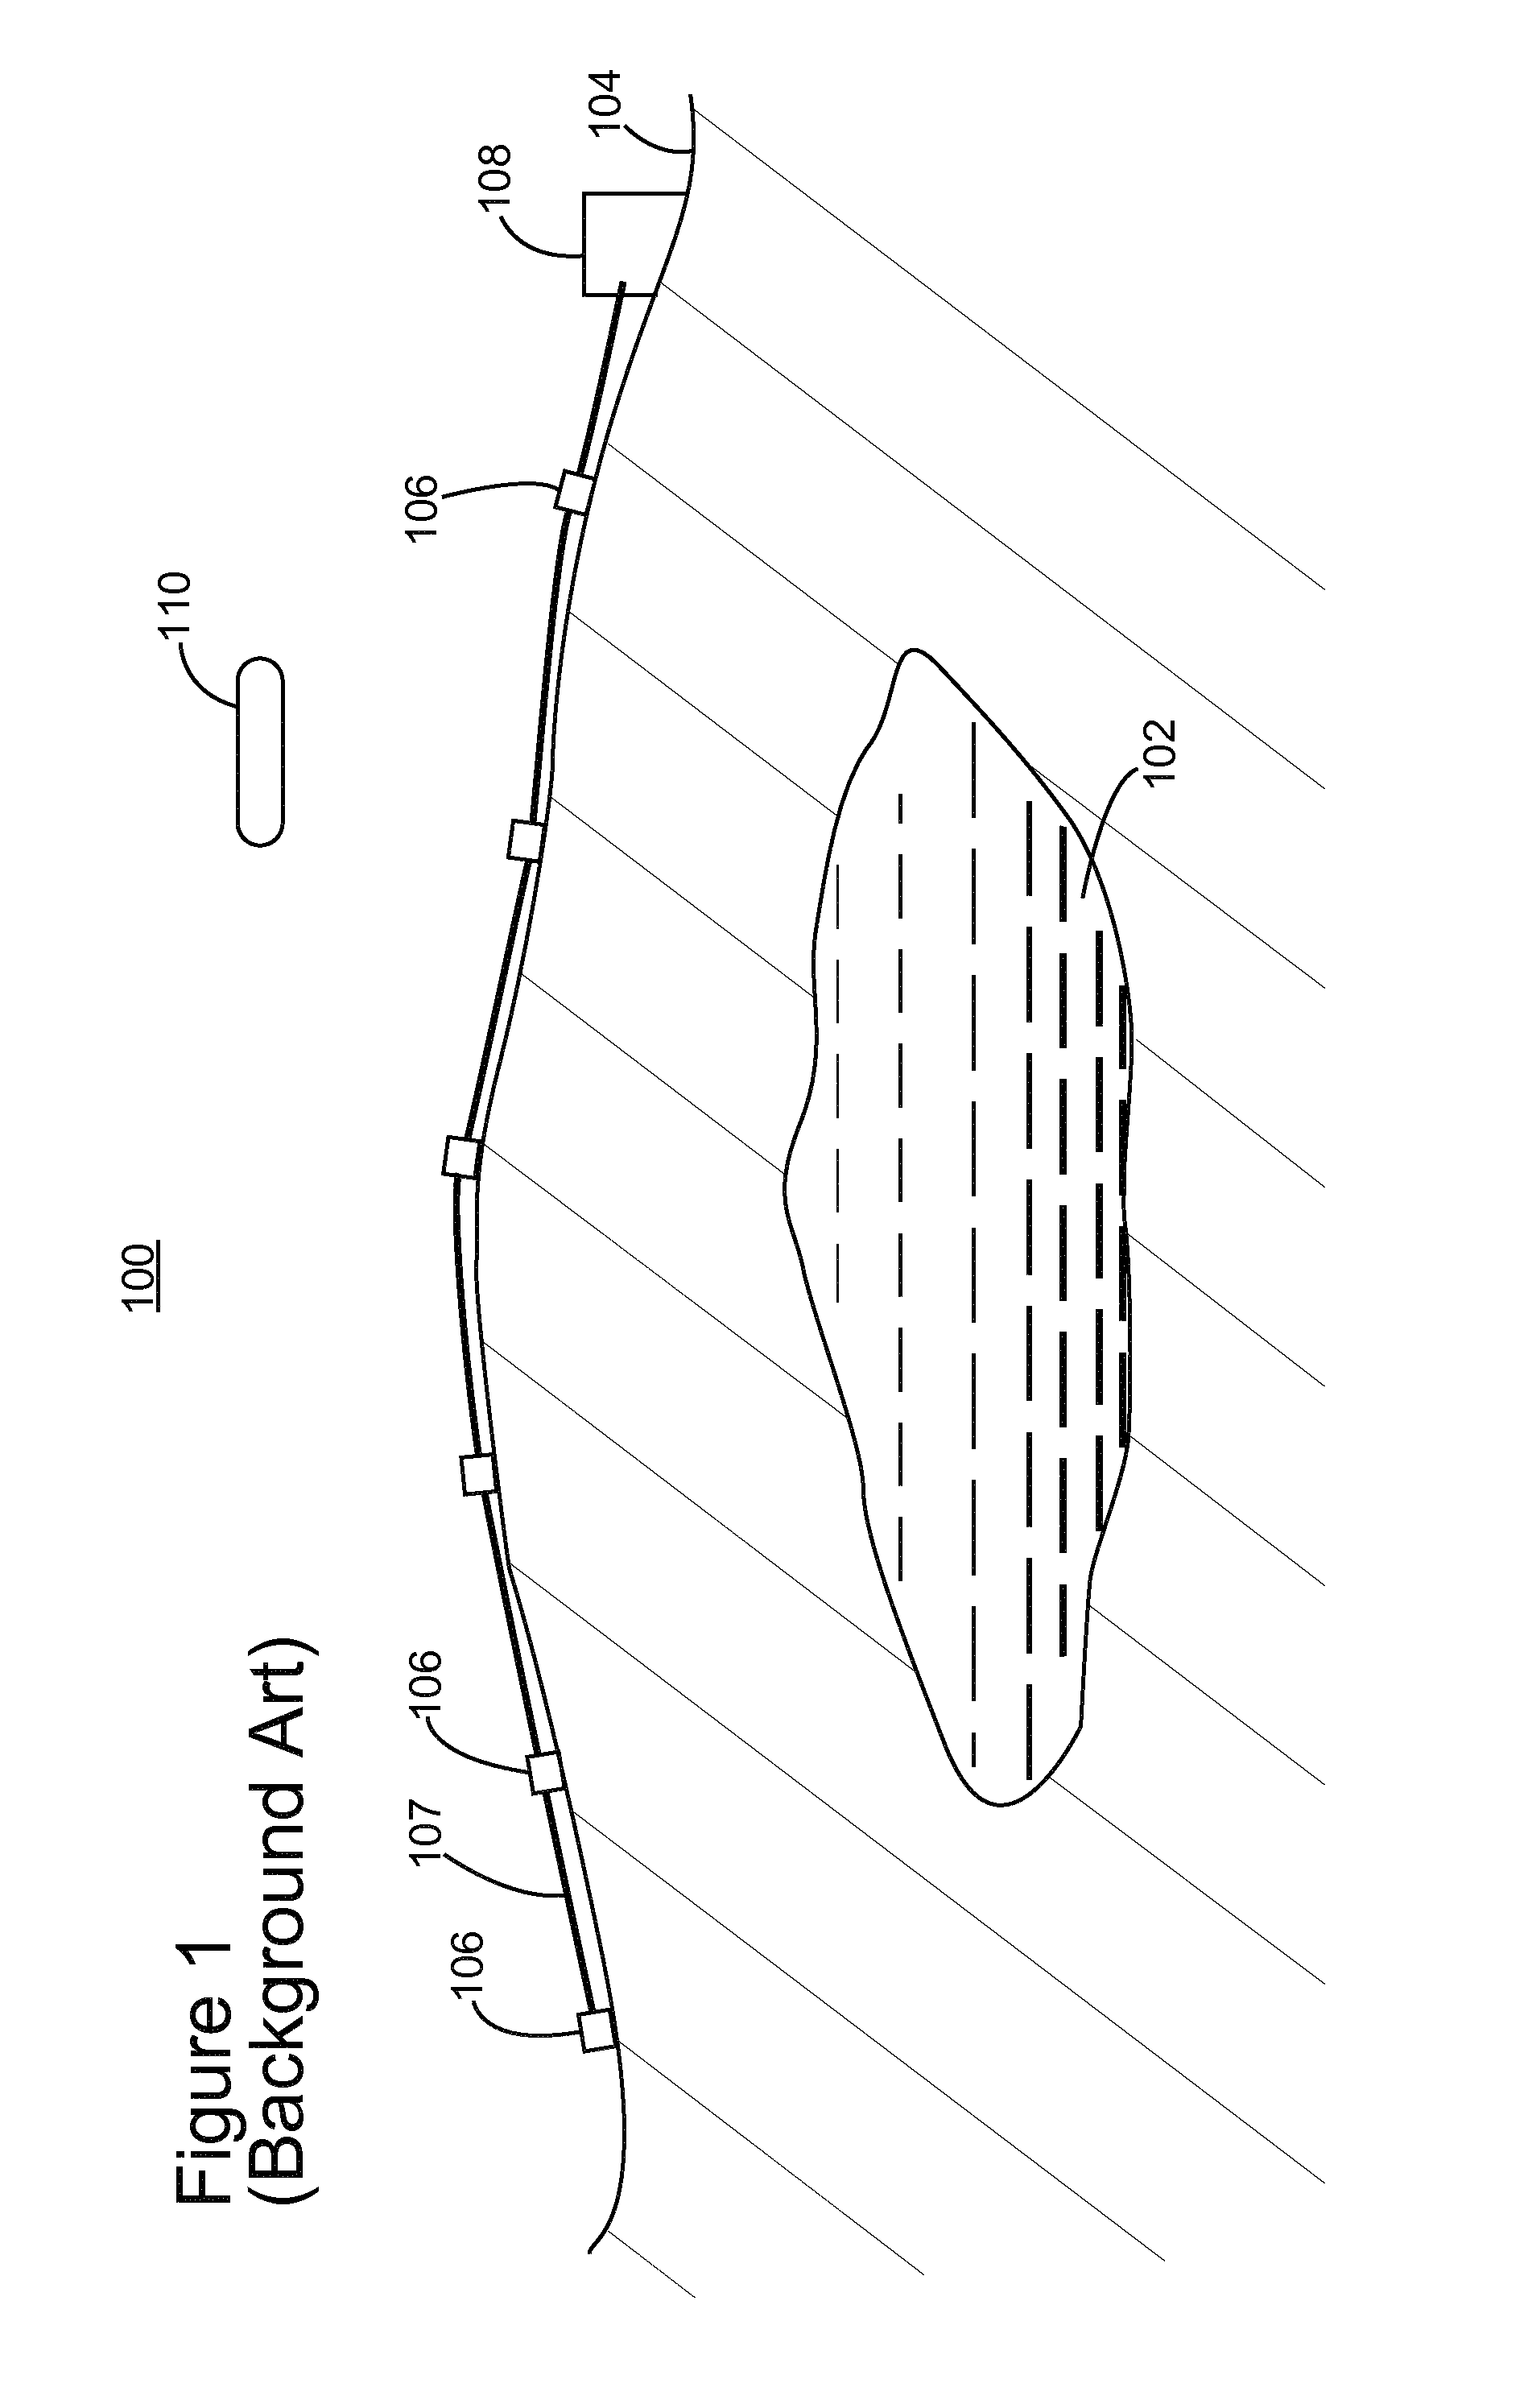 Offshore seismic monitoring system and method